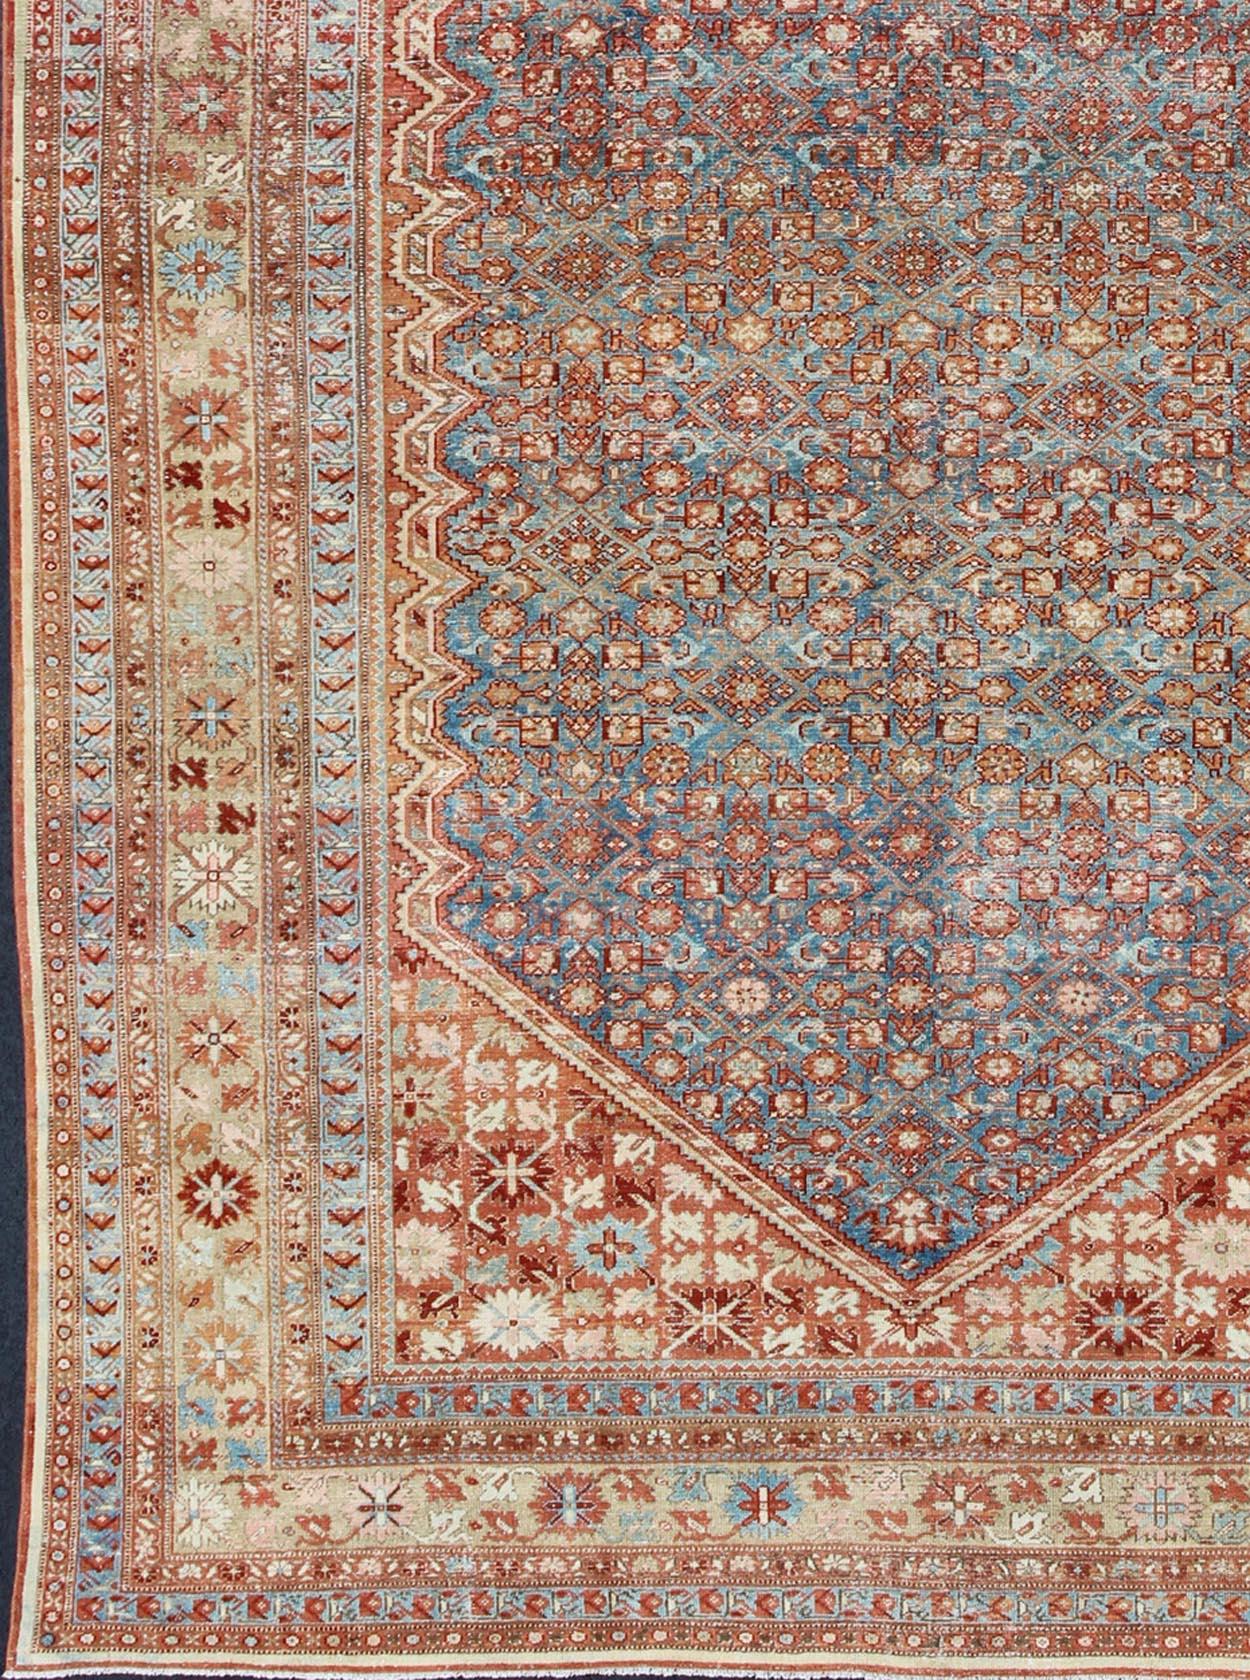 Colorful antique Persian Malayer rug with all-over design in rust and blue. Keivan Woven Arts / rug sus-1807-276, country of origin / type: Iran / Malayer, circa 1910.
Measures: 10'3 x 16'.
This antique Persian Malayer rug was handwoven in the early